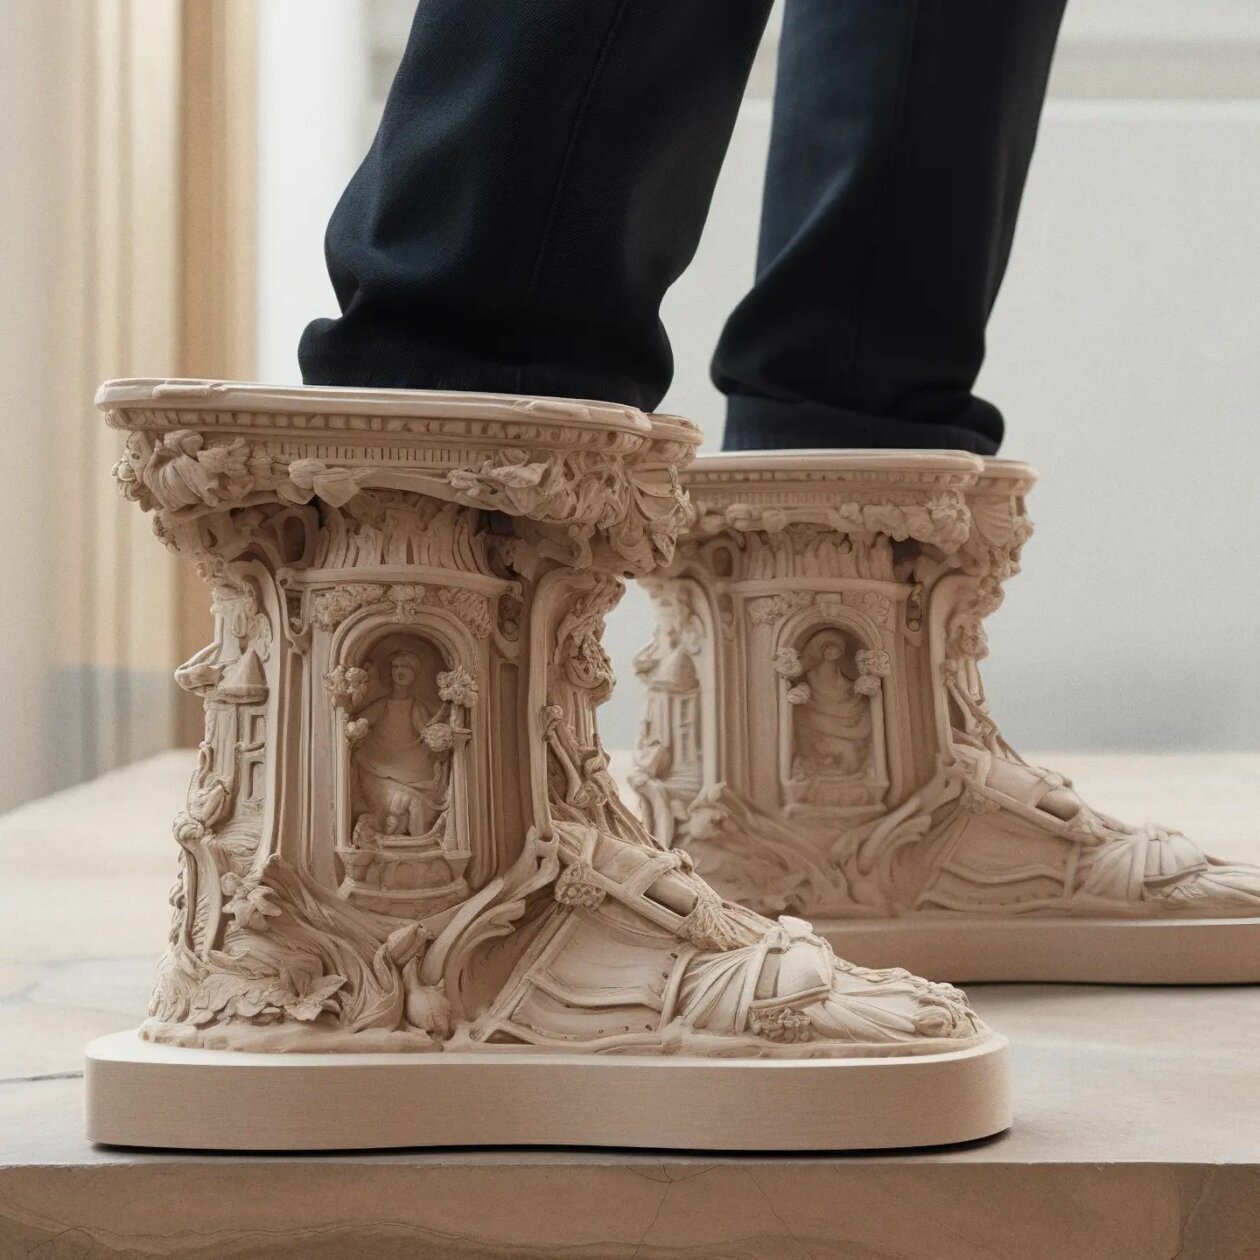 Fantastic Renaissance Inspired Ai Generated Footwear Imagined By Str4ngething 6